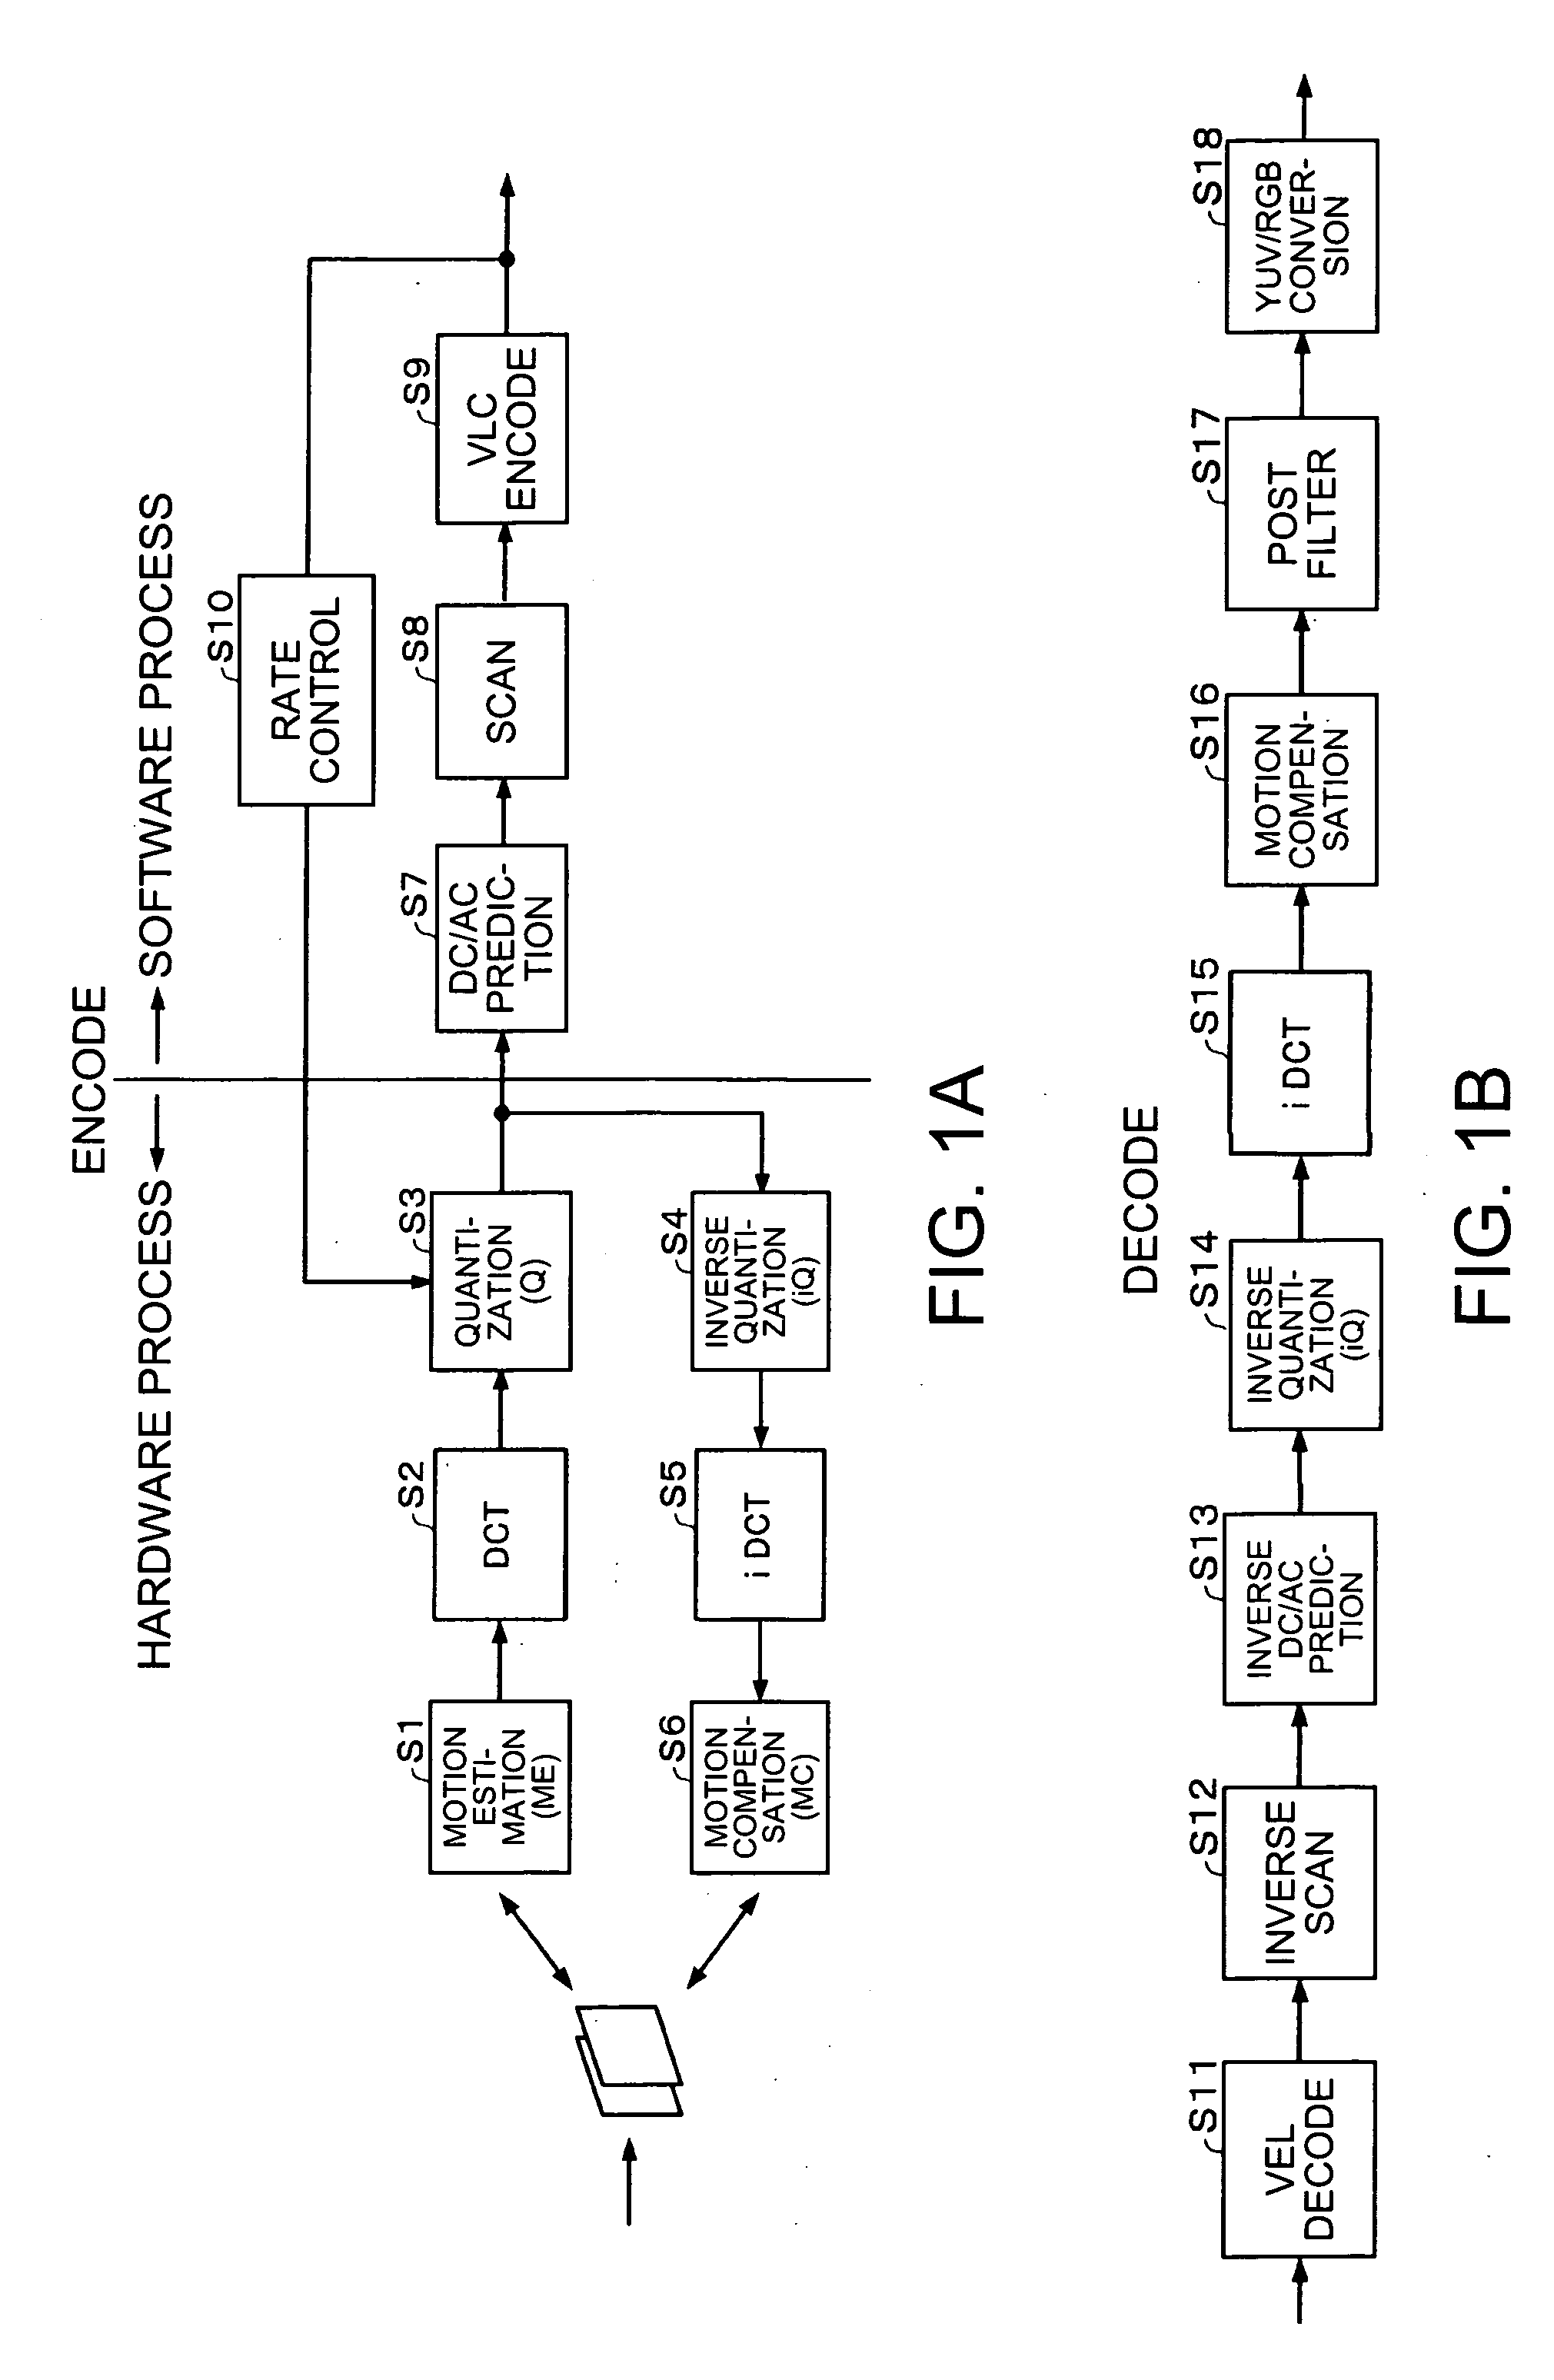 Image data compression device, encoder, electronic apparatus, and method of compressing image data